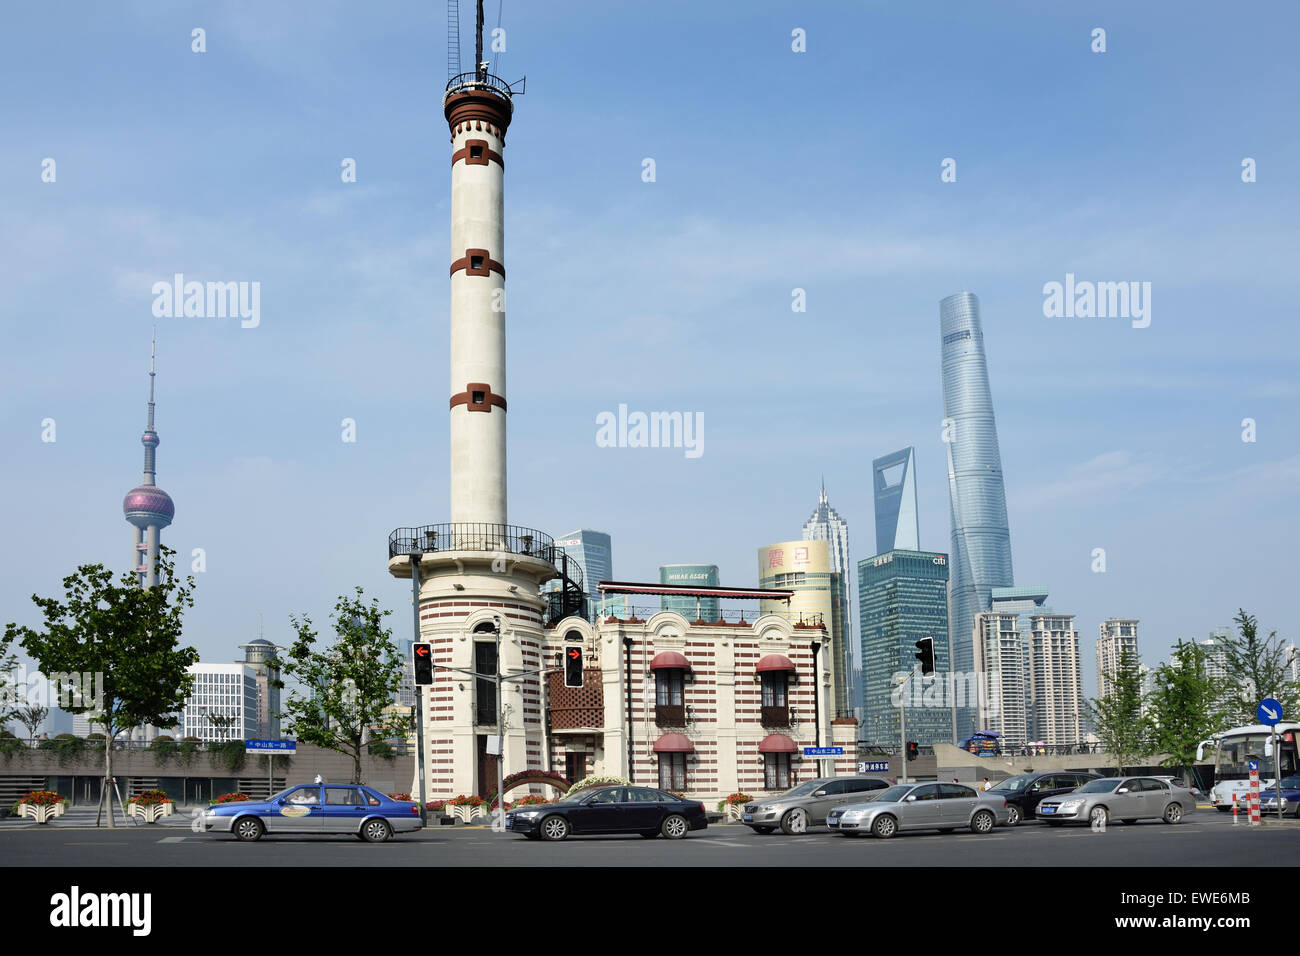 Lighthouse Museum on the Bund Shanghai background Pudong City SkylineOriental Pearl television tower, Jin Mao Tower, Huangpu River China Stock Photo